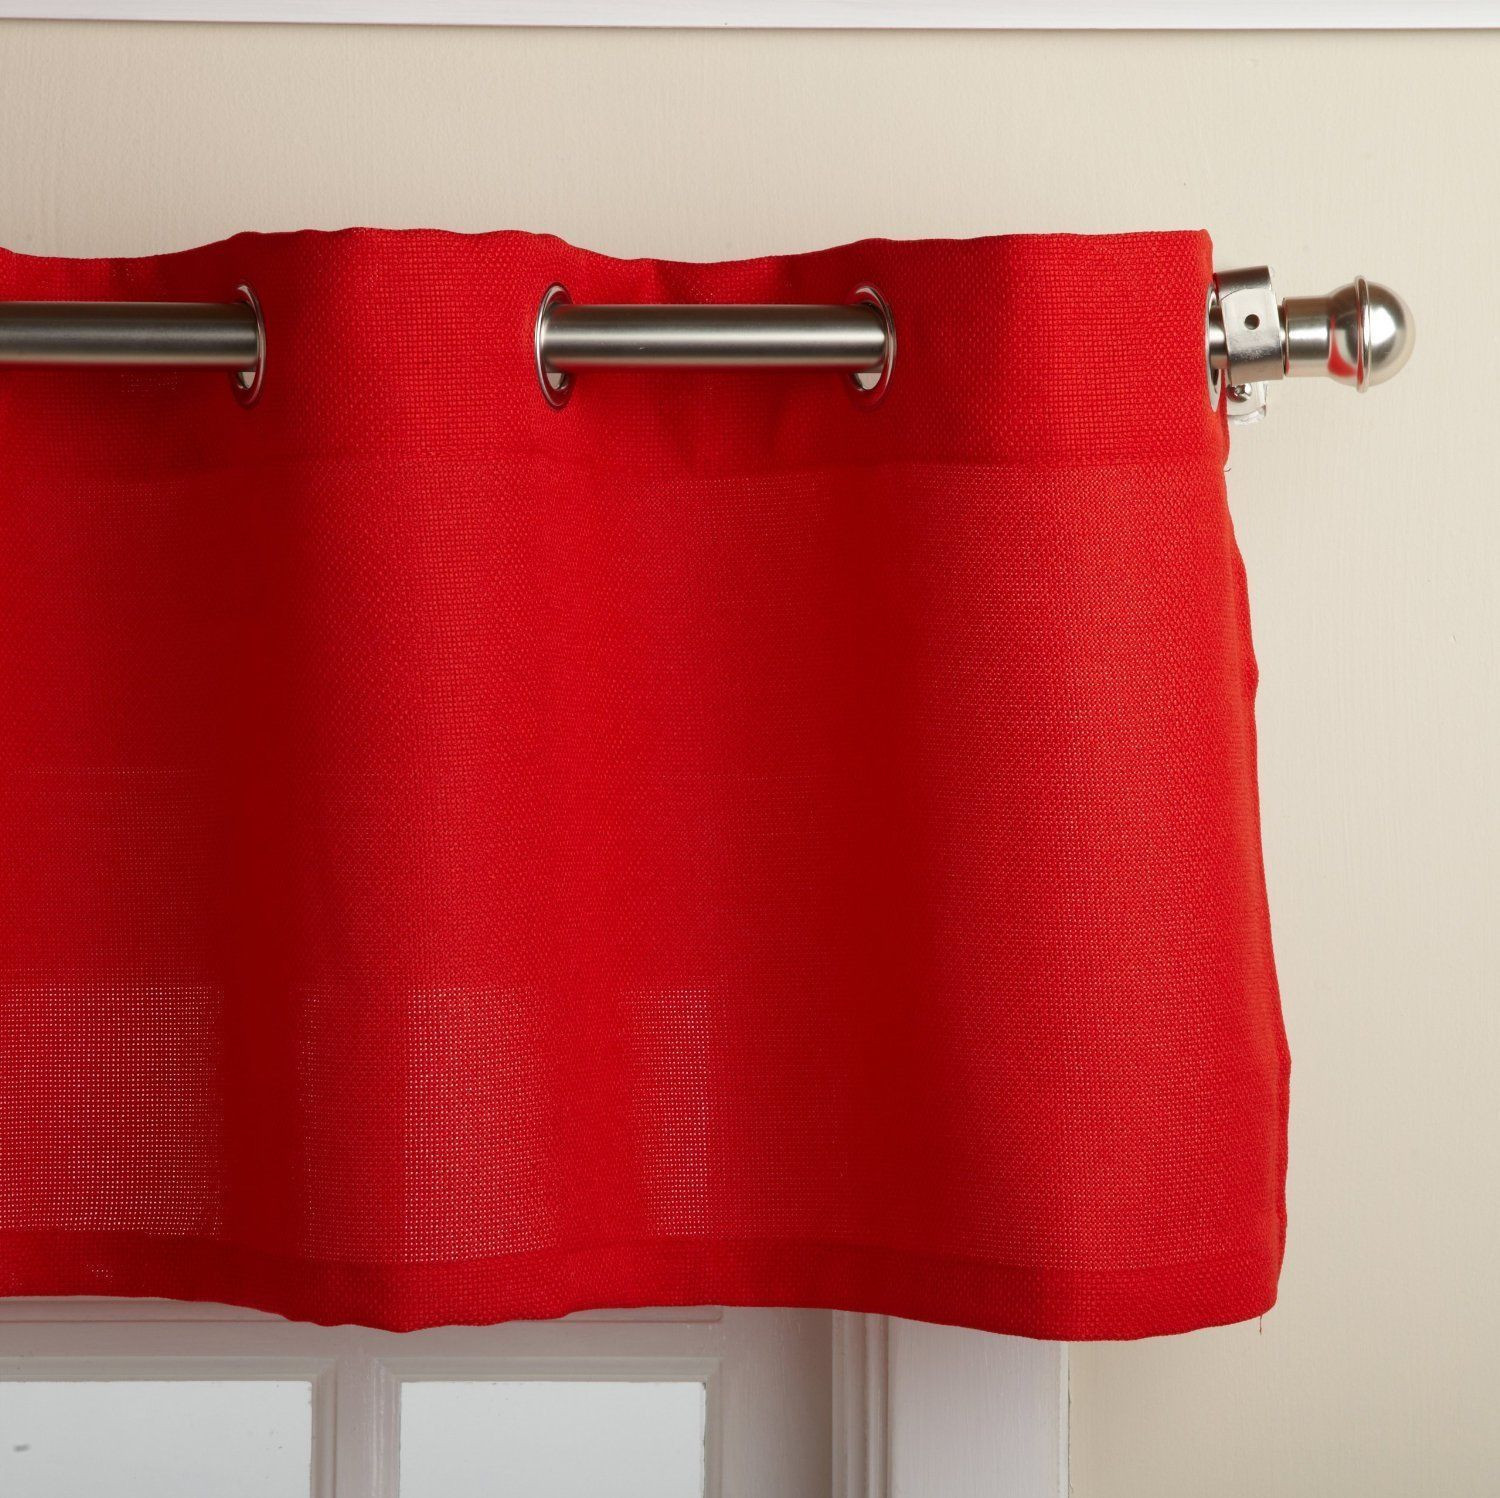 Red Valance Curtains For Kitchen
 Jackson Textured Solid Red Kitchen Curtain Choice Tiers or